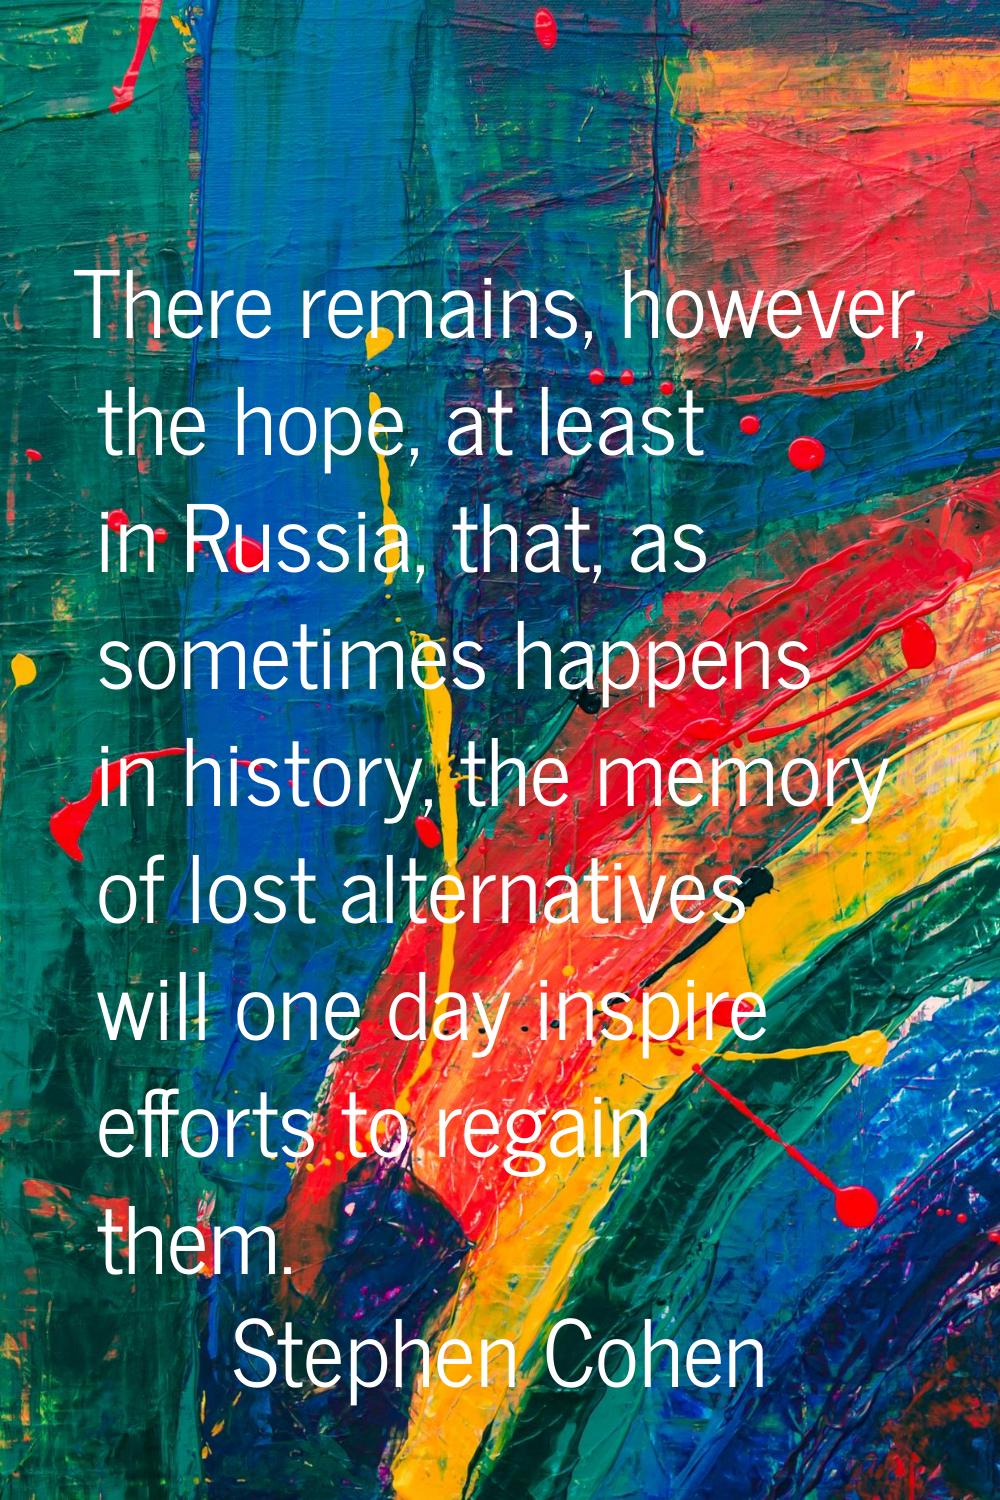 There remains, however, the hope, at least in Russia, that, as sometimes happens in history, the me